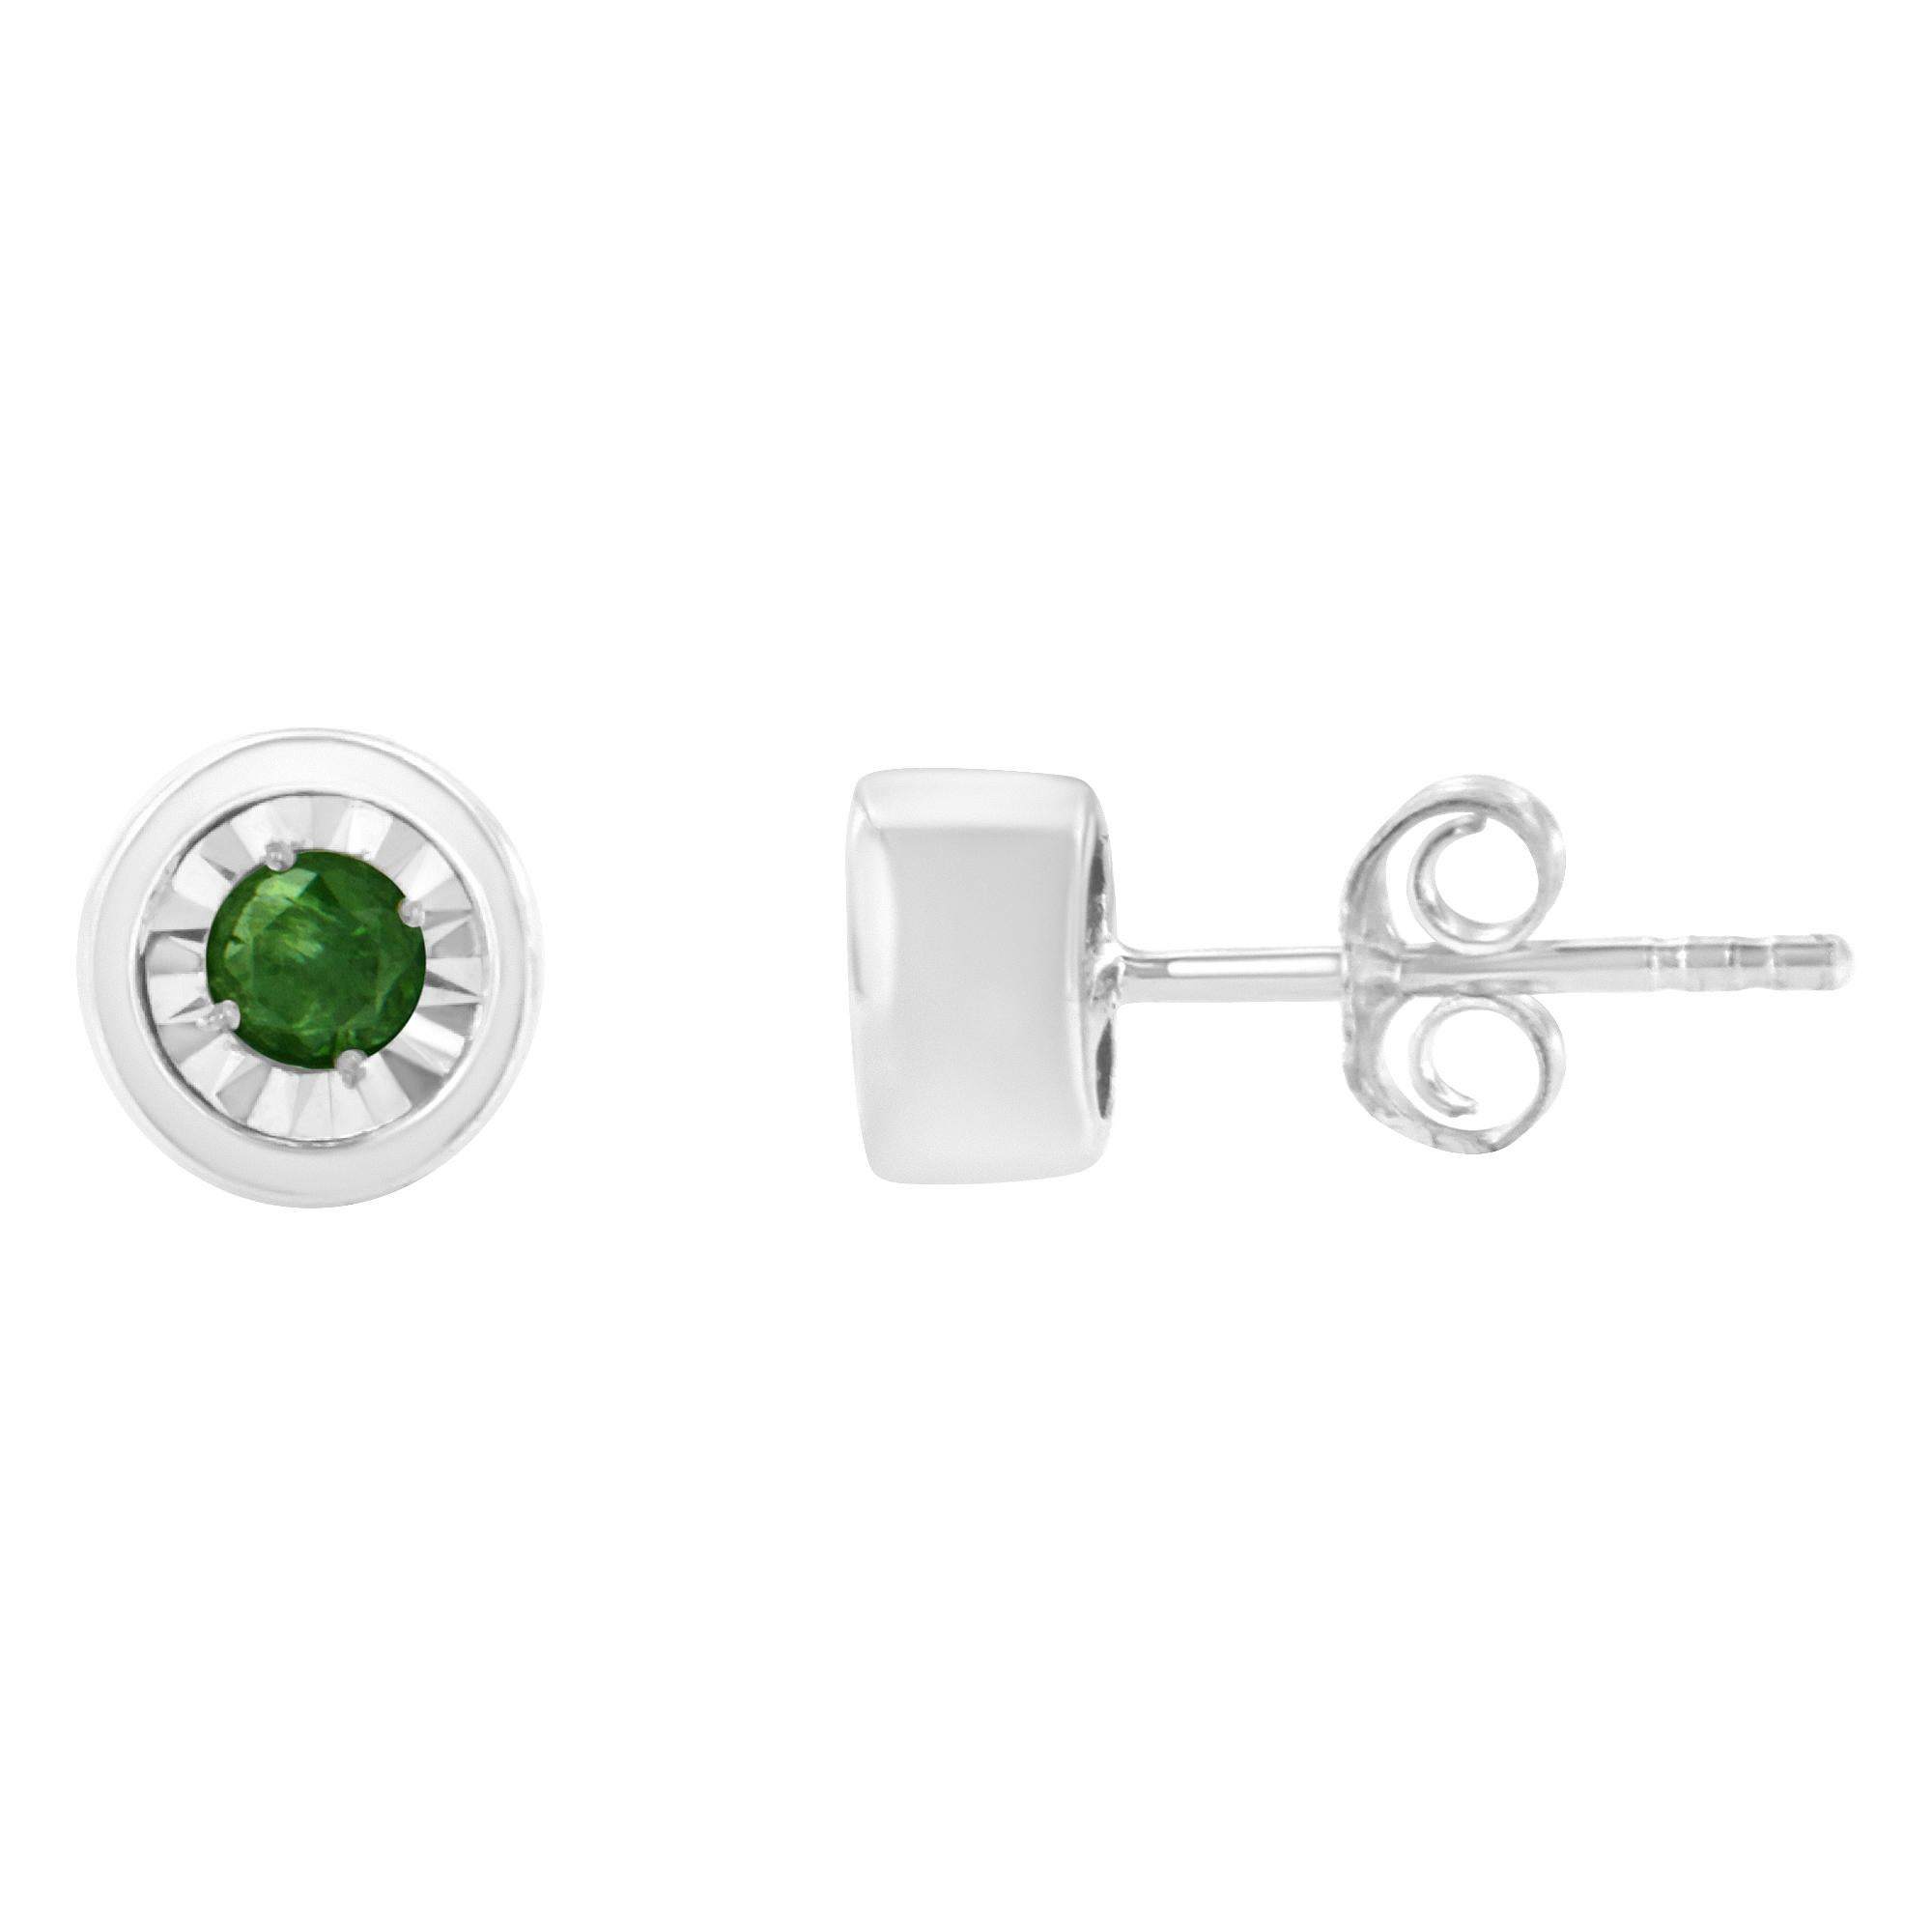 This modern pair of diamond studs features color treated green diamonds in a bezel setting. The sleek design is crafted in a cool sterling silver making them the perfect choice to add a touch of color to everyday wear. The total diamond weight is